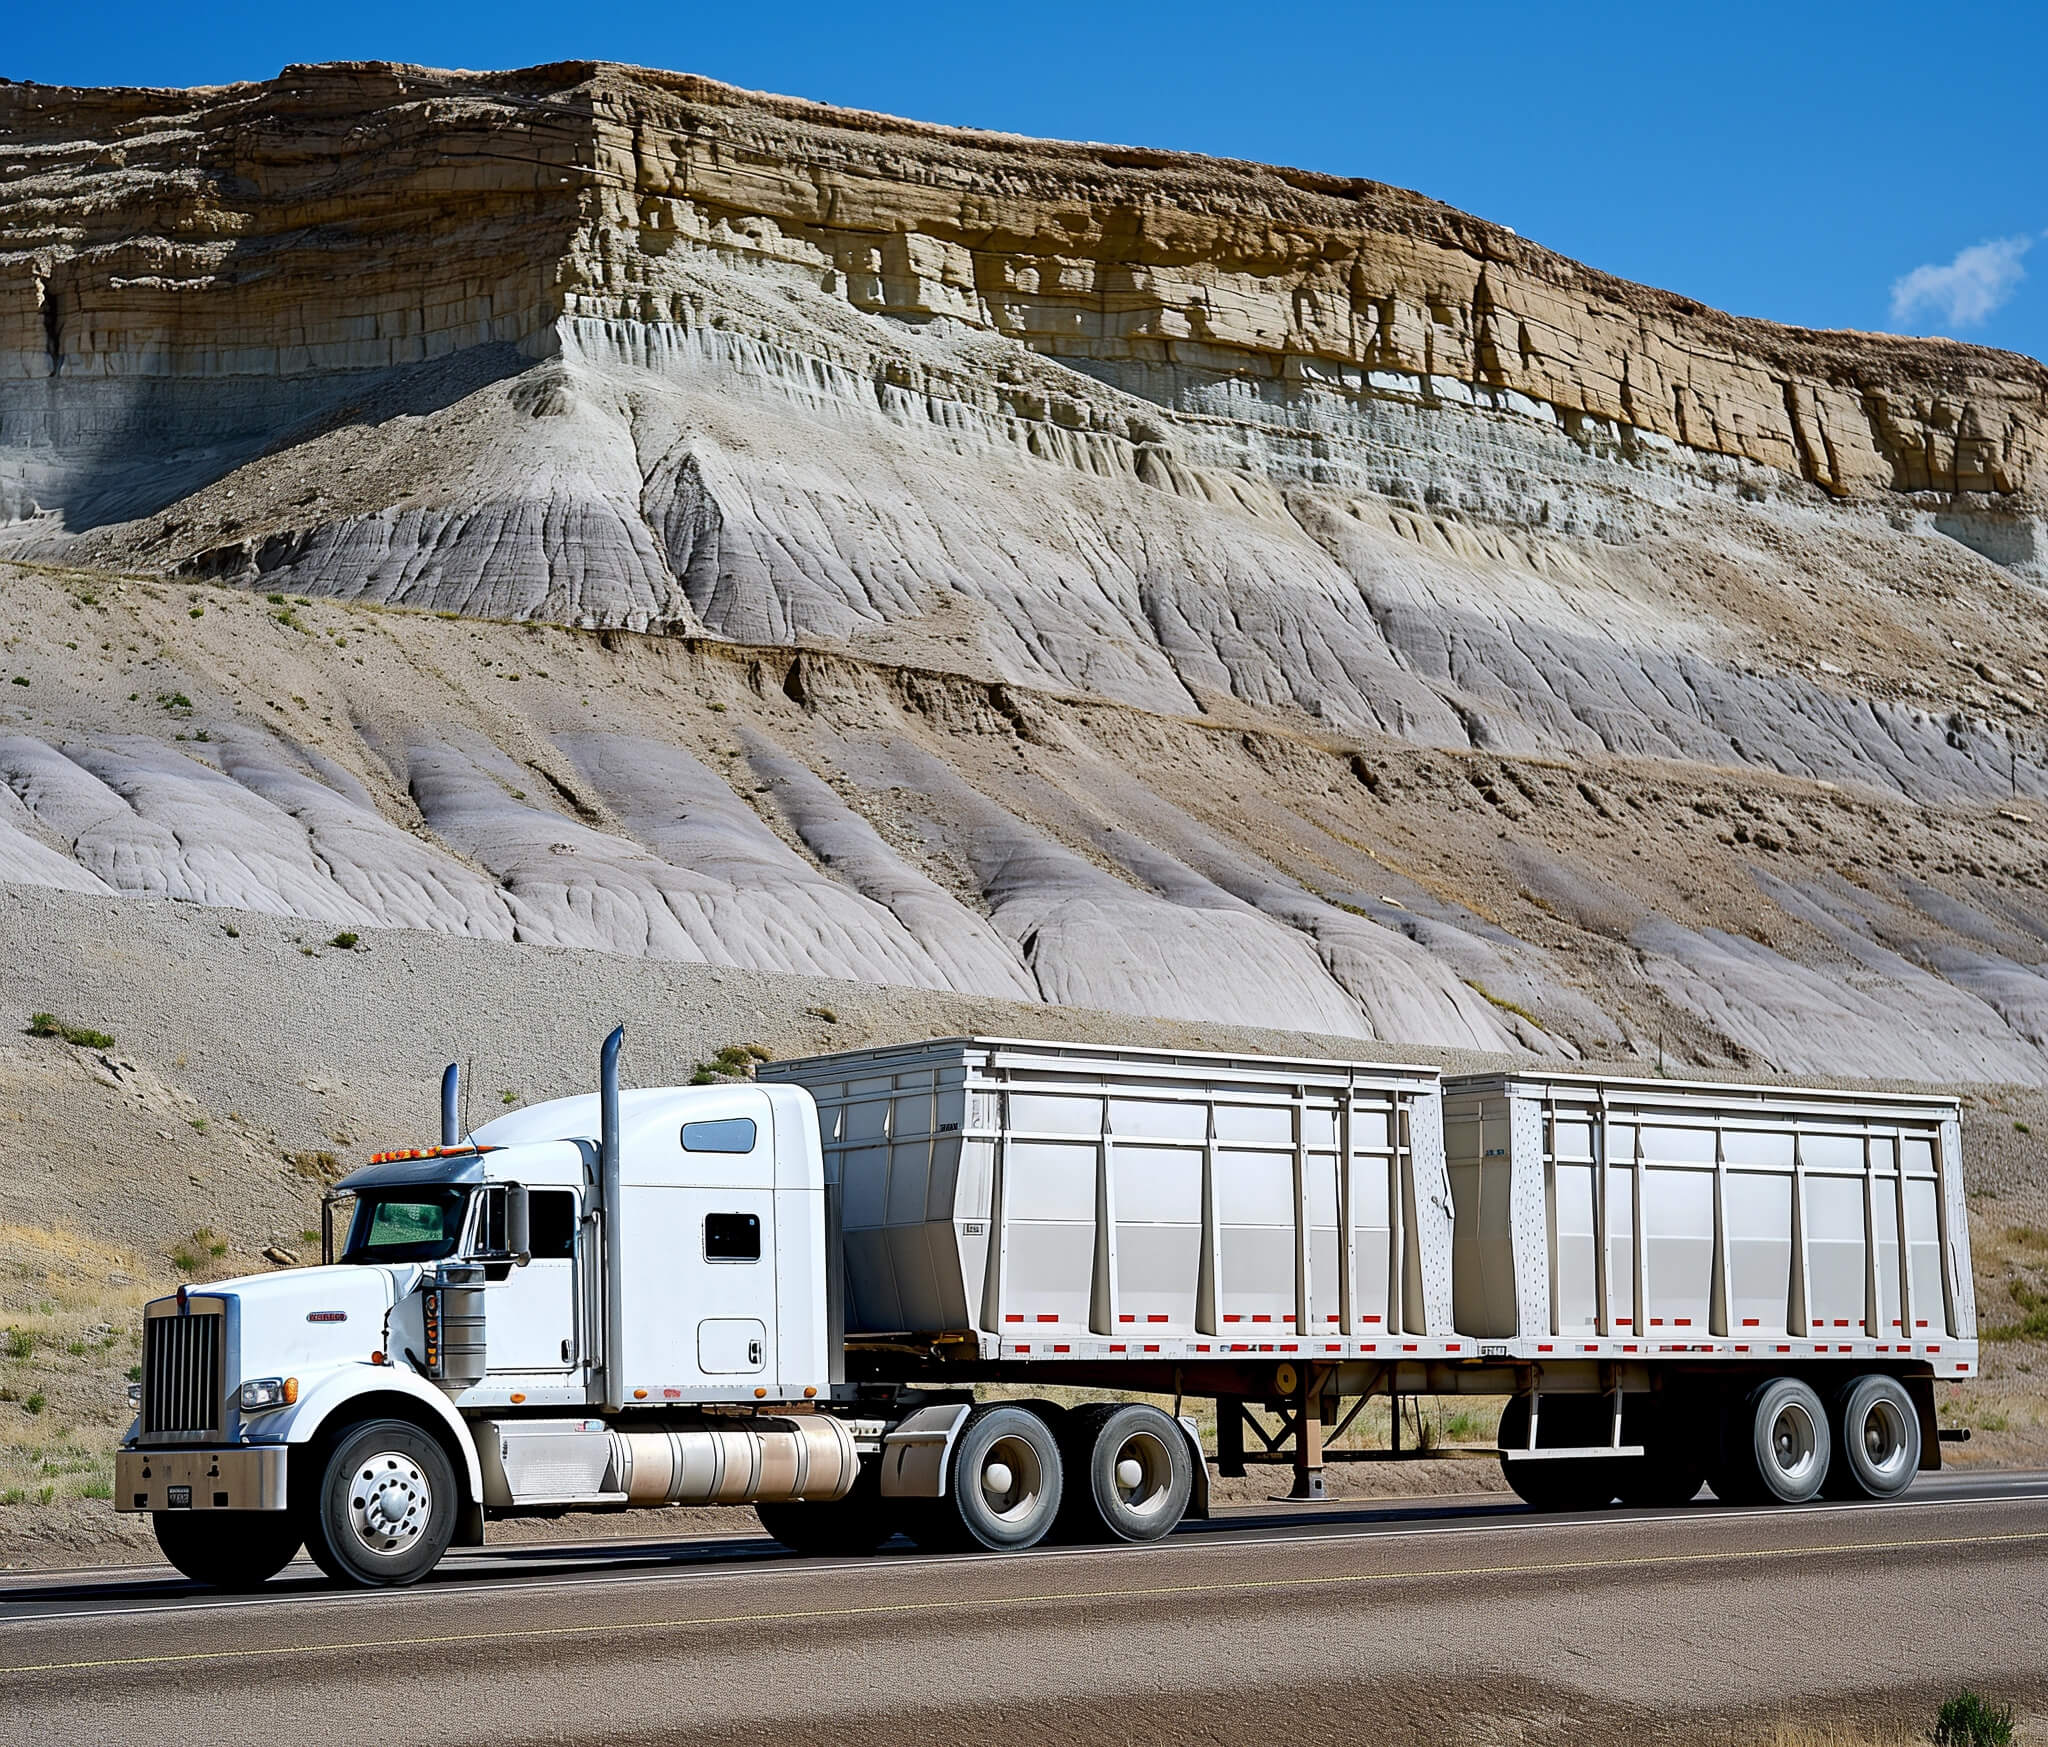 A white semi tractor fulling two trailers near a mountain